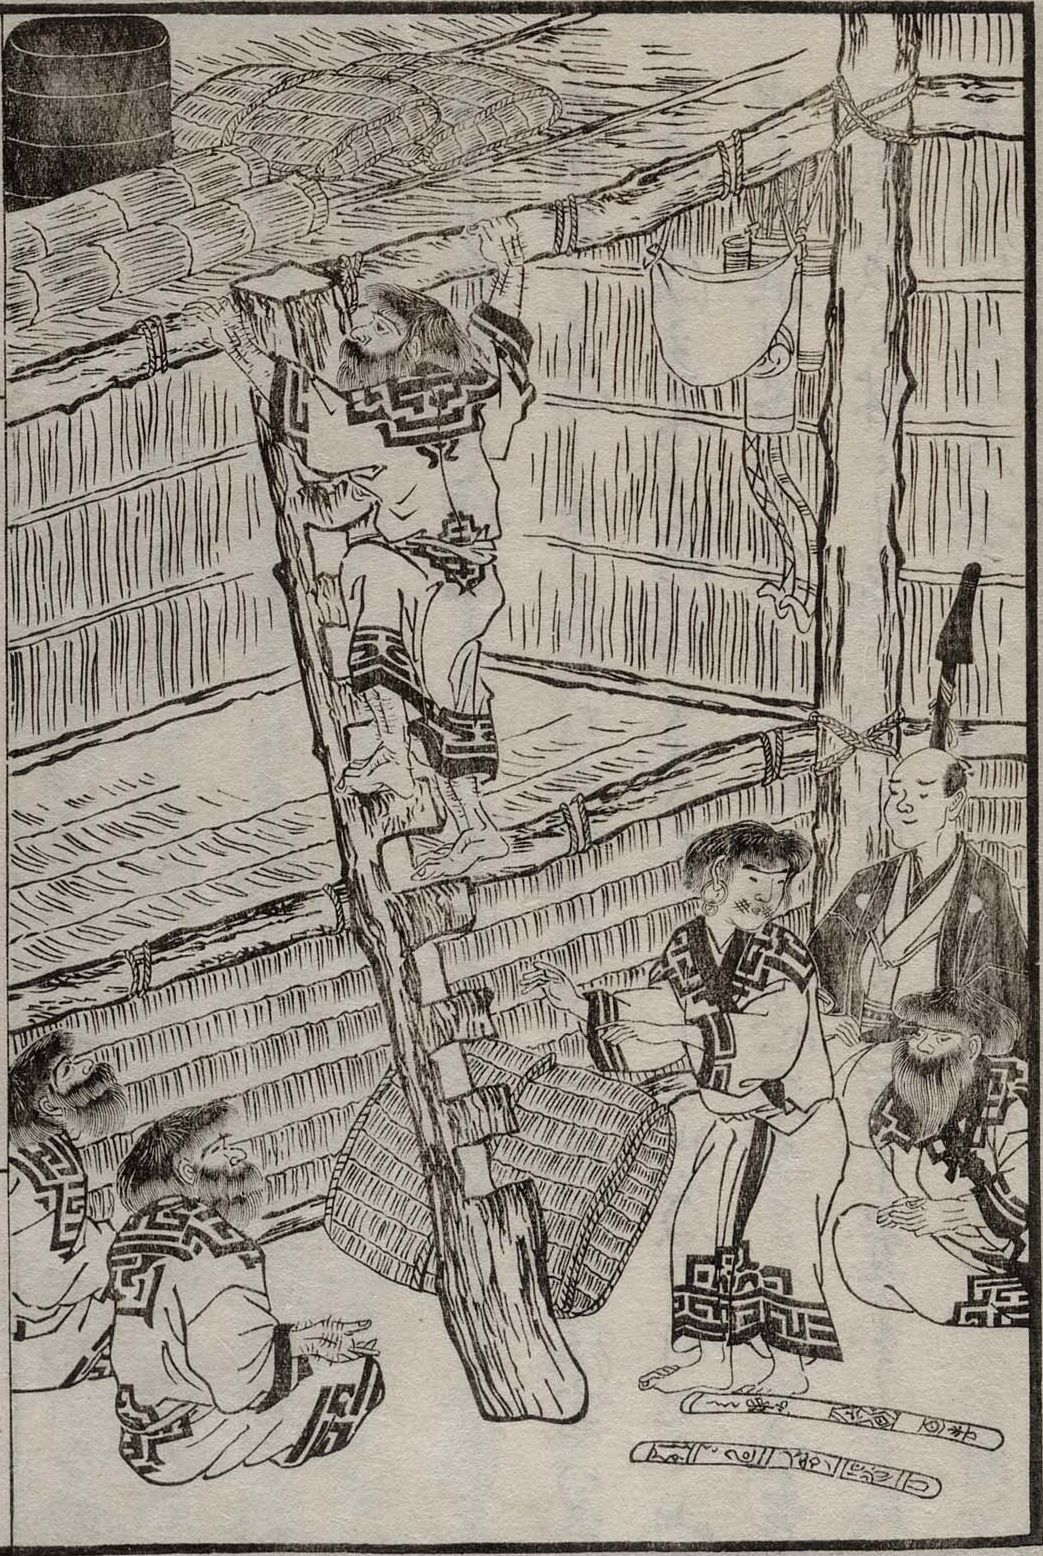 the cartoon shows children climbing stairs with two other people watching